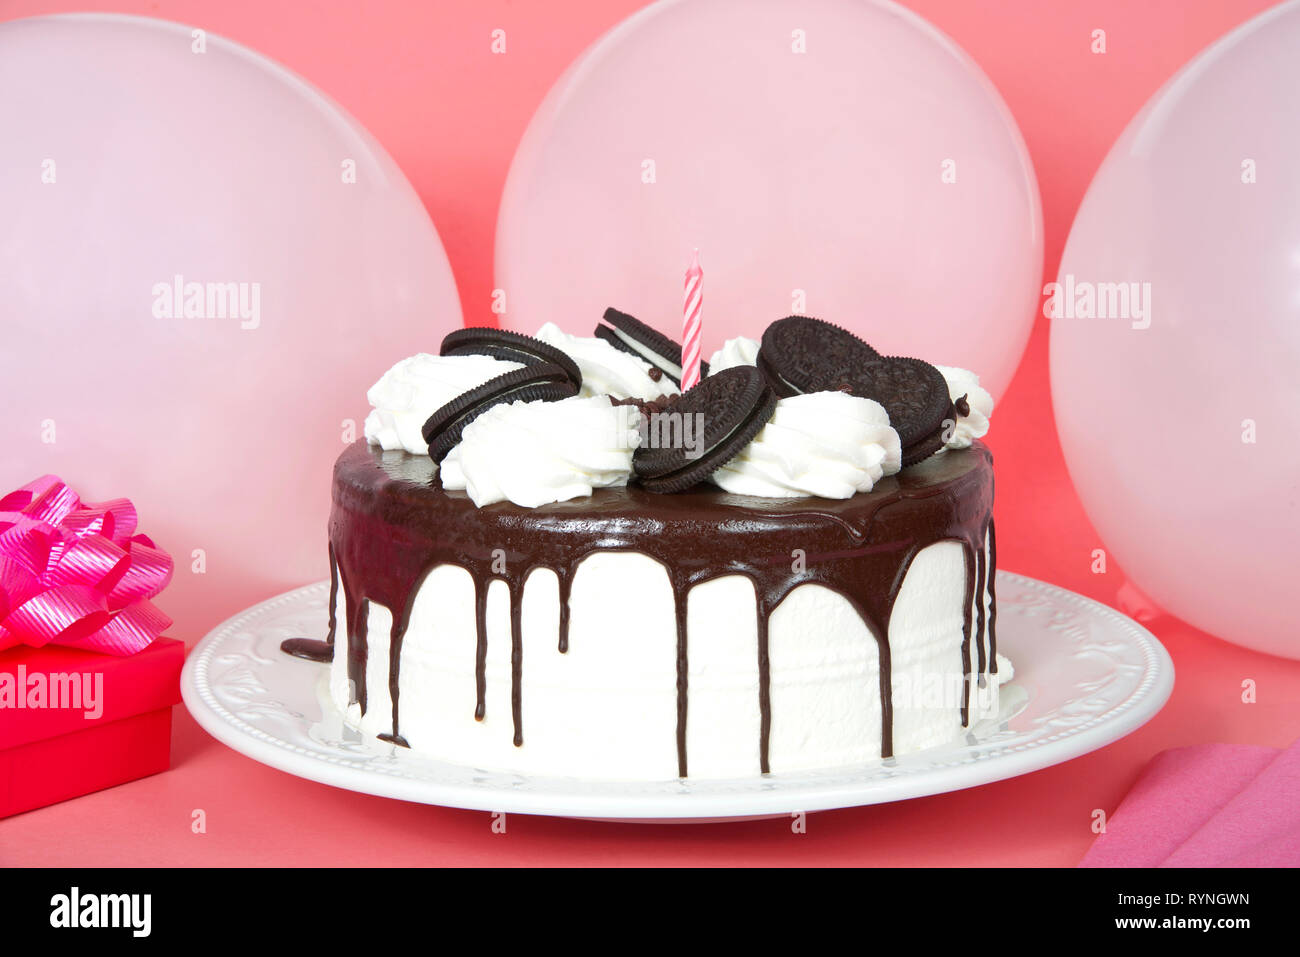 White whipped cream frosted cake with chocolate cream filled sandwich wafer cookies, melted chocolate melting down the sides on a porcelain plate, on  Stock Photo